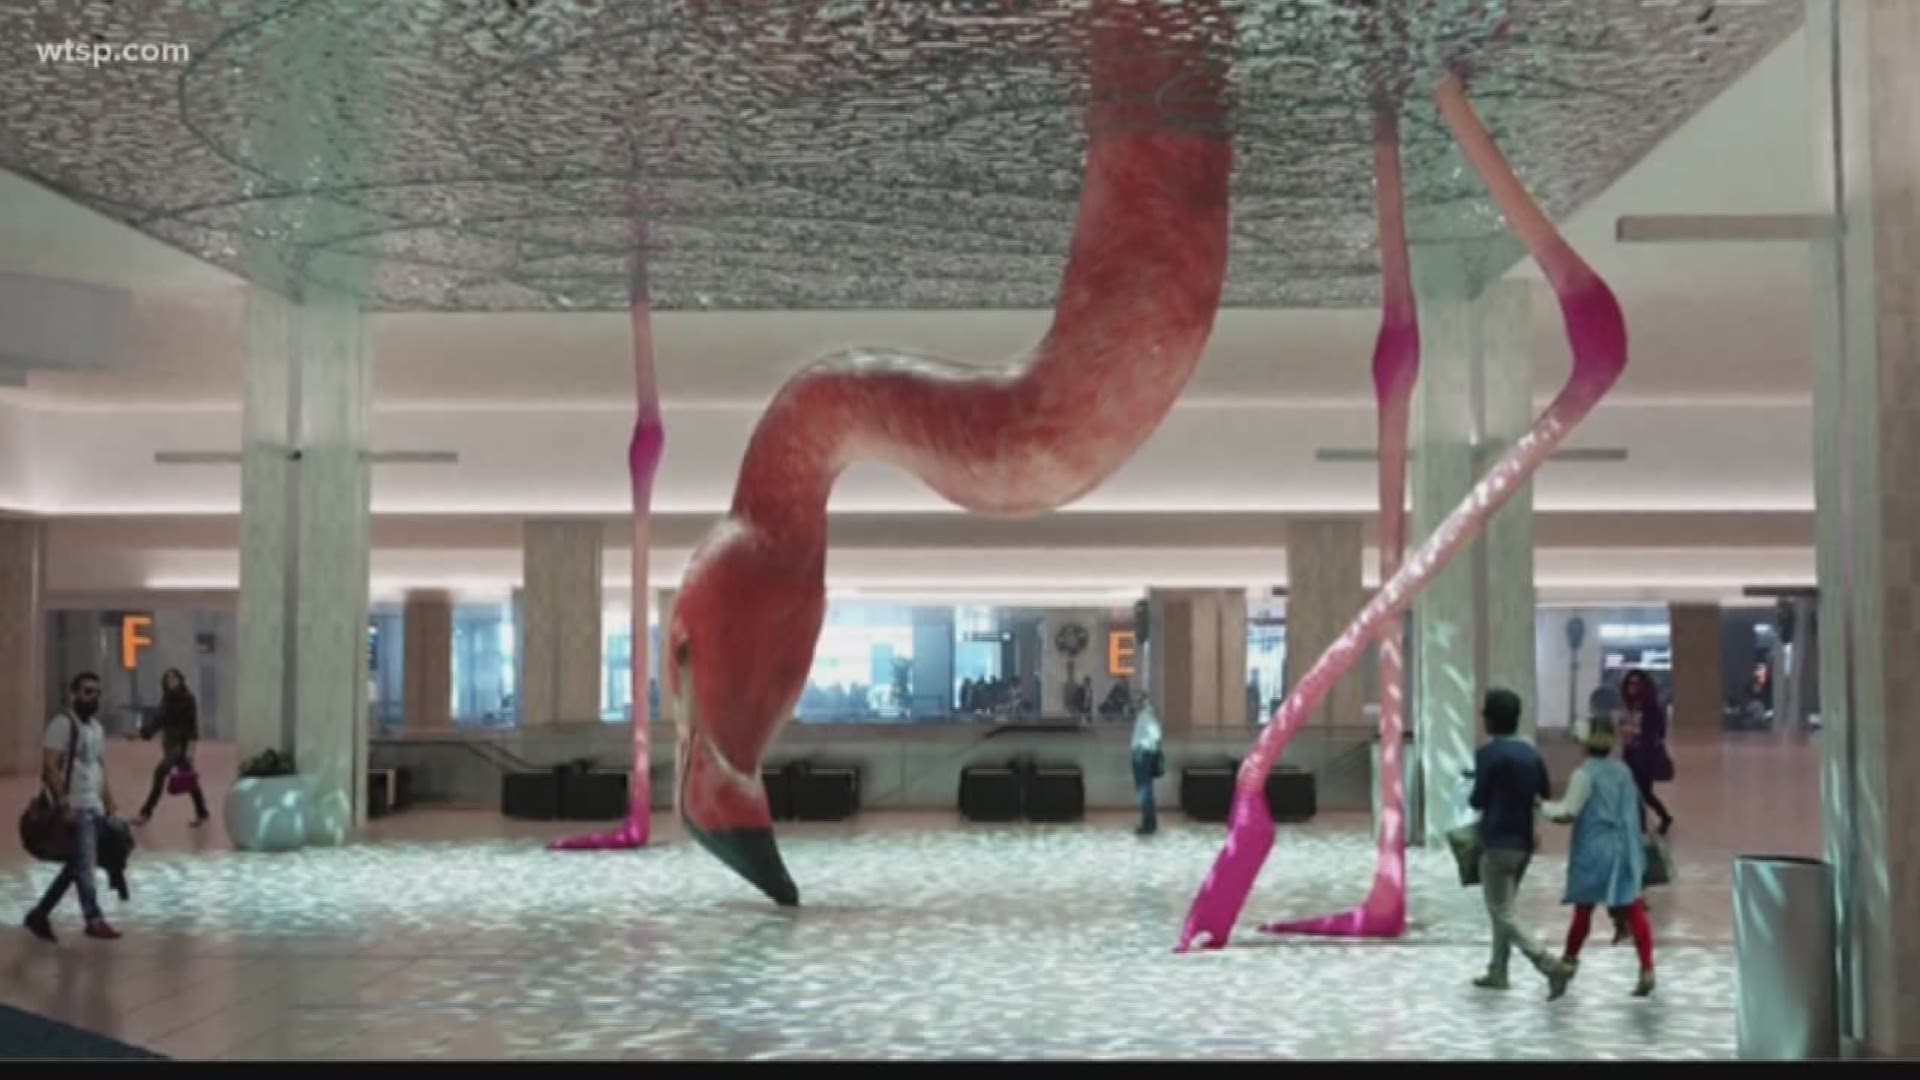 It’s called HOME by Matthew Mazzotta. It’s a floor-to-ceiling sculpture of a flamingo dipping its head into the water.